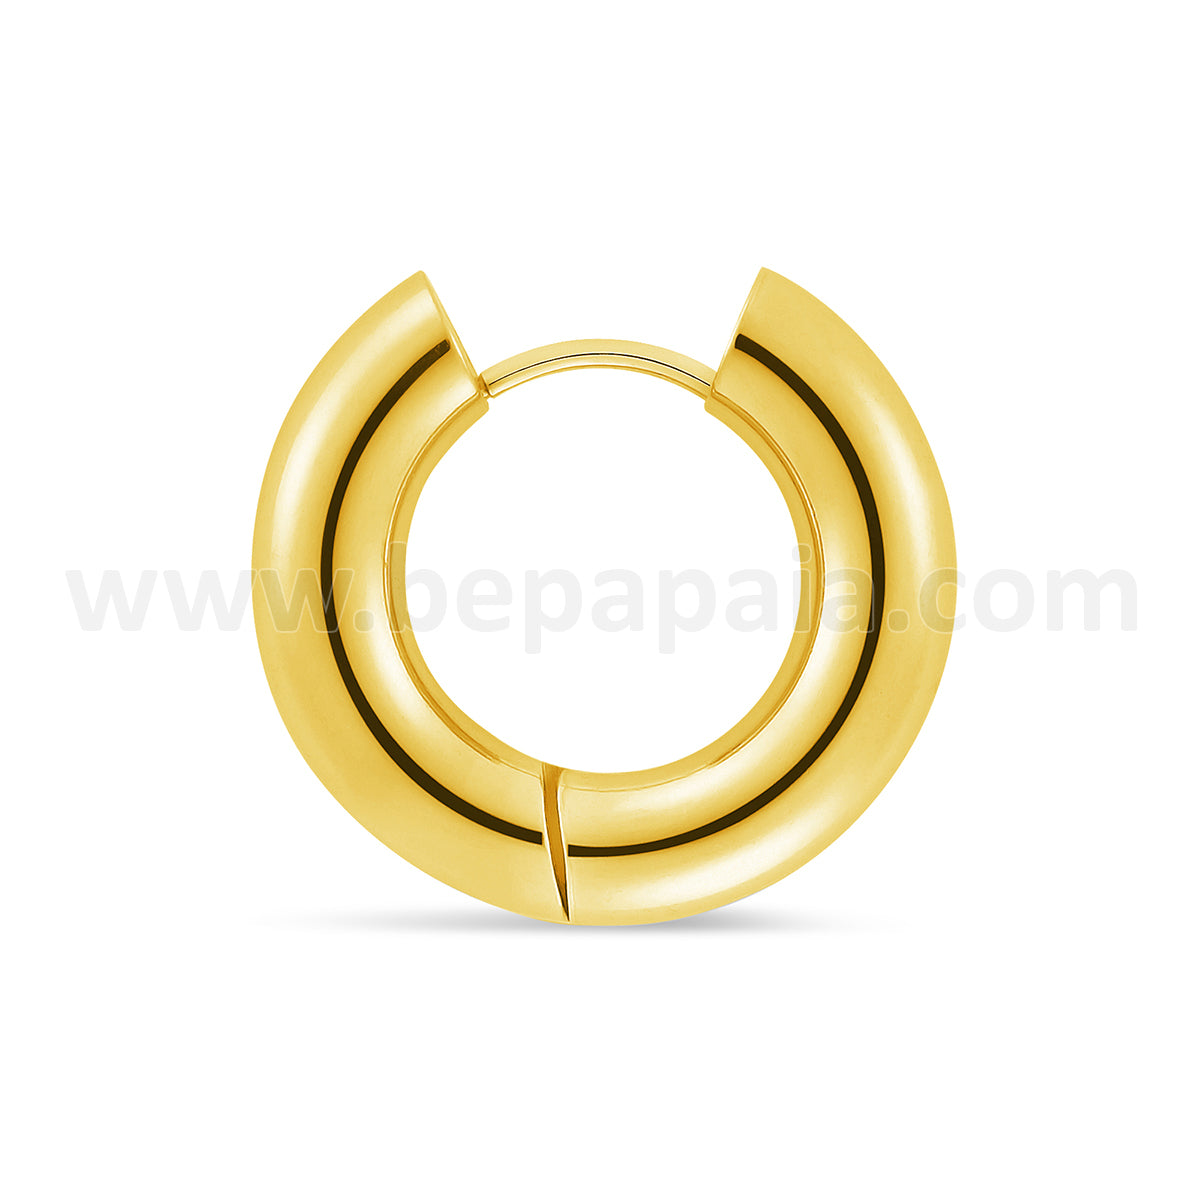 Stainless steel gold colour hoop earring 4 & 5 mm